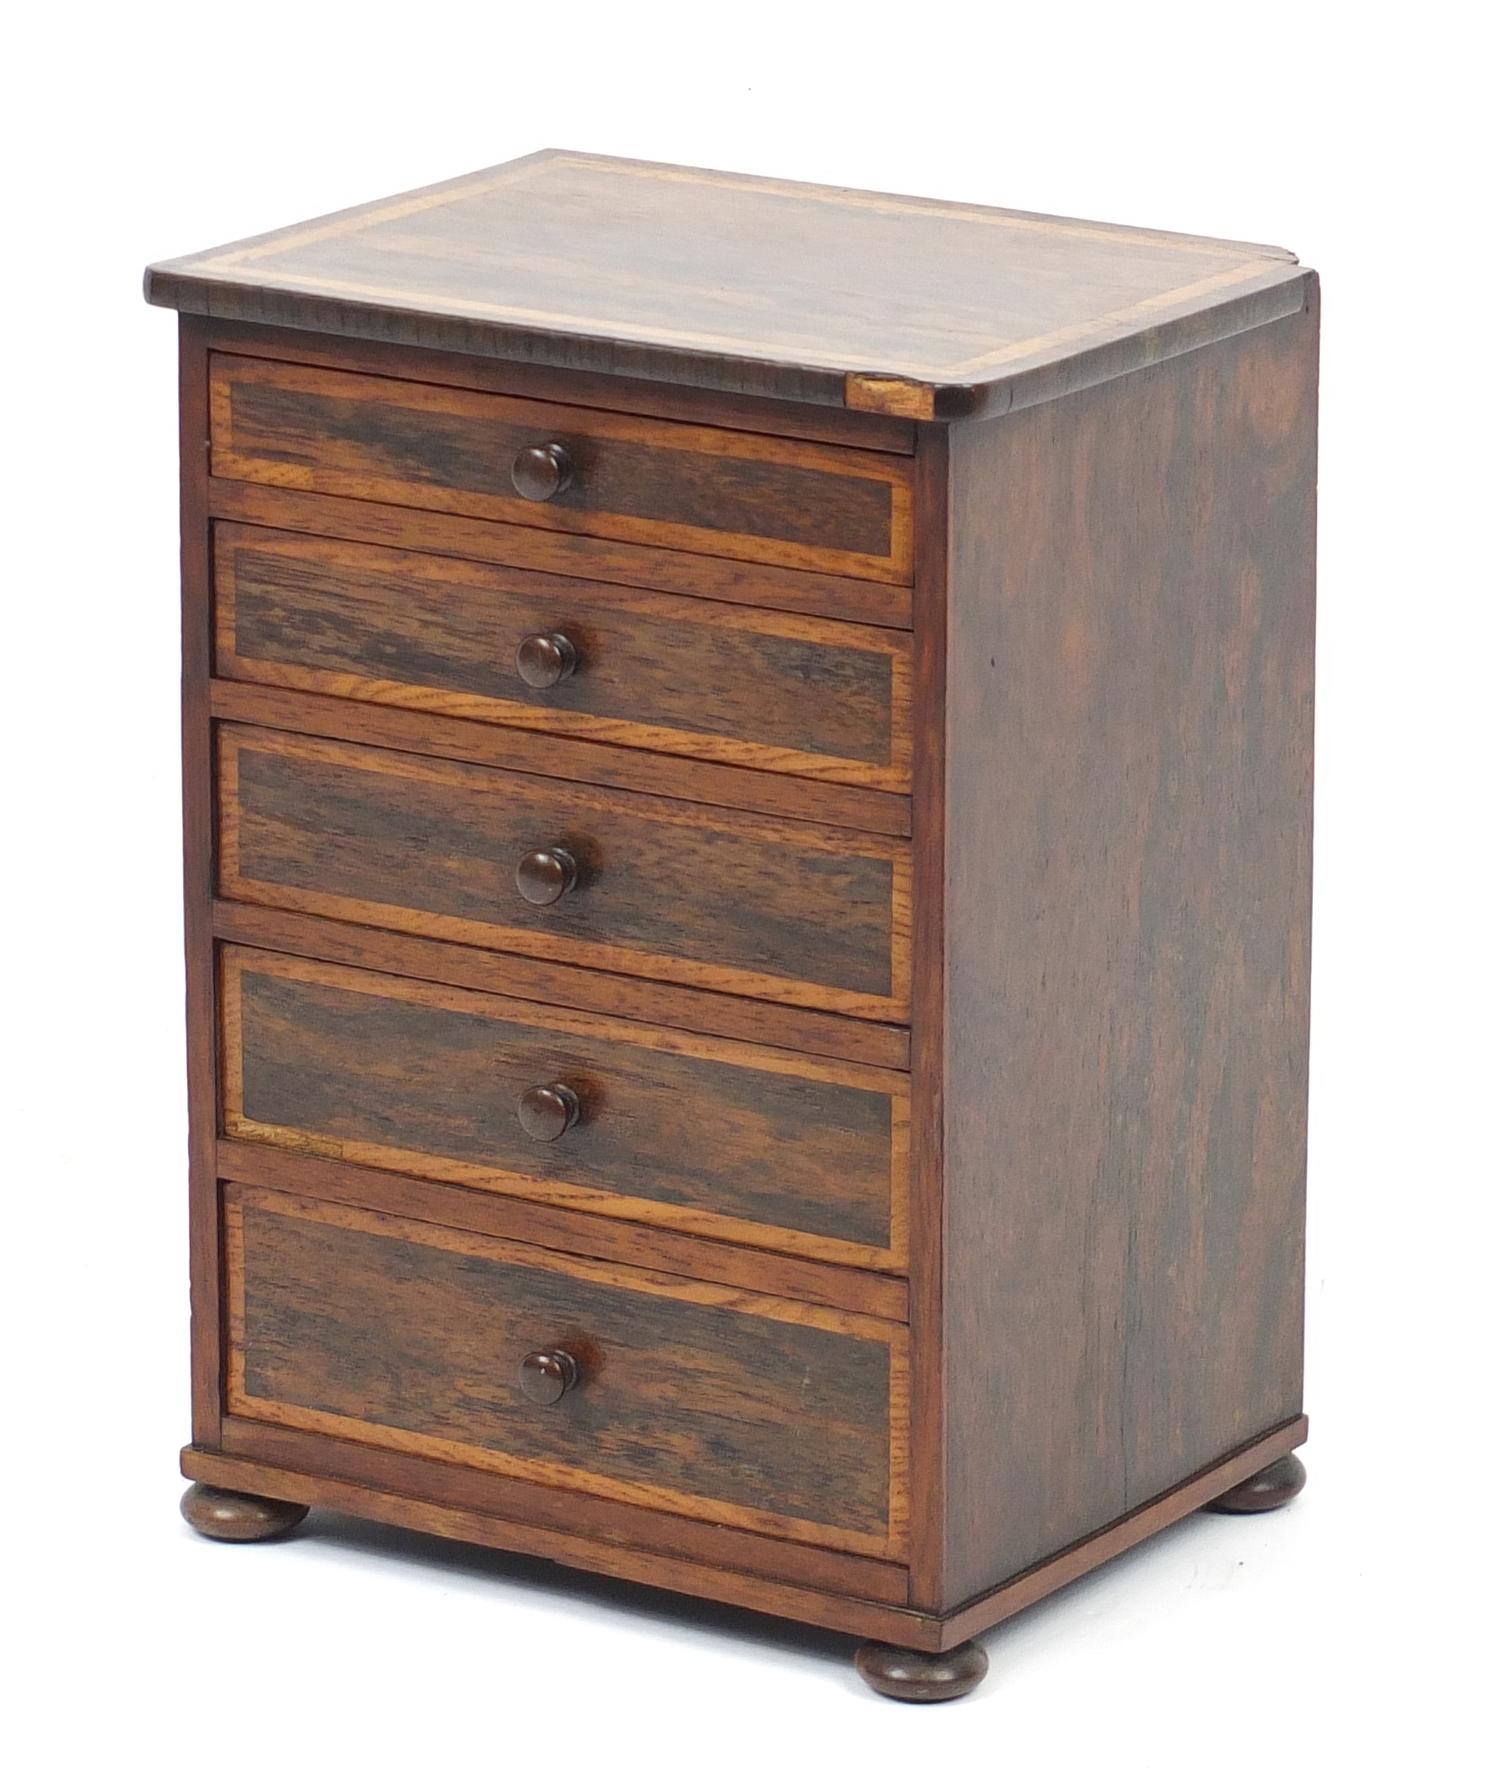 Victorian rosewood five drawer apprentice chest with oak inlay, 37.5cm H x 27.5cm W x 21cm D :For